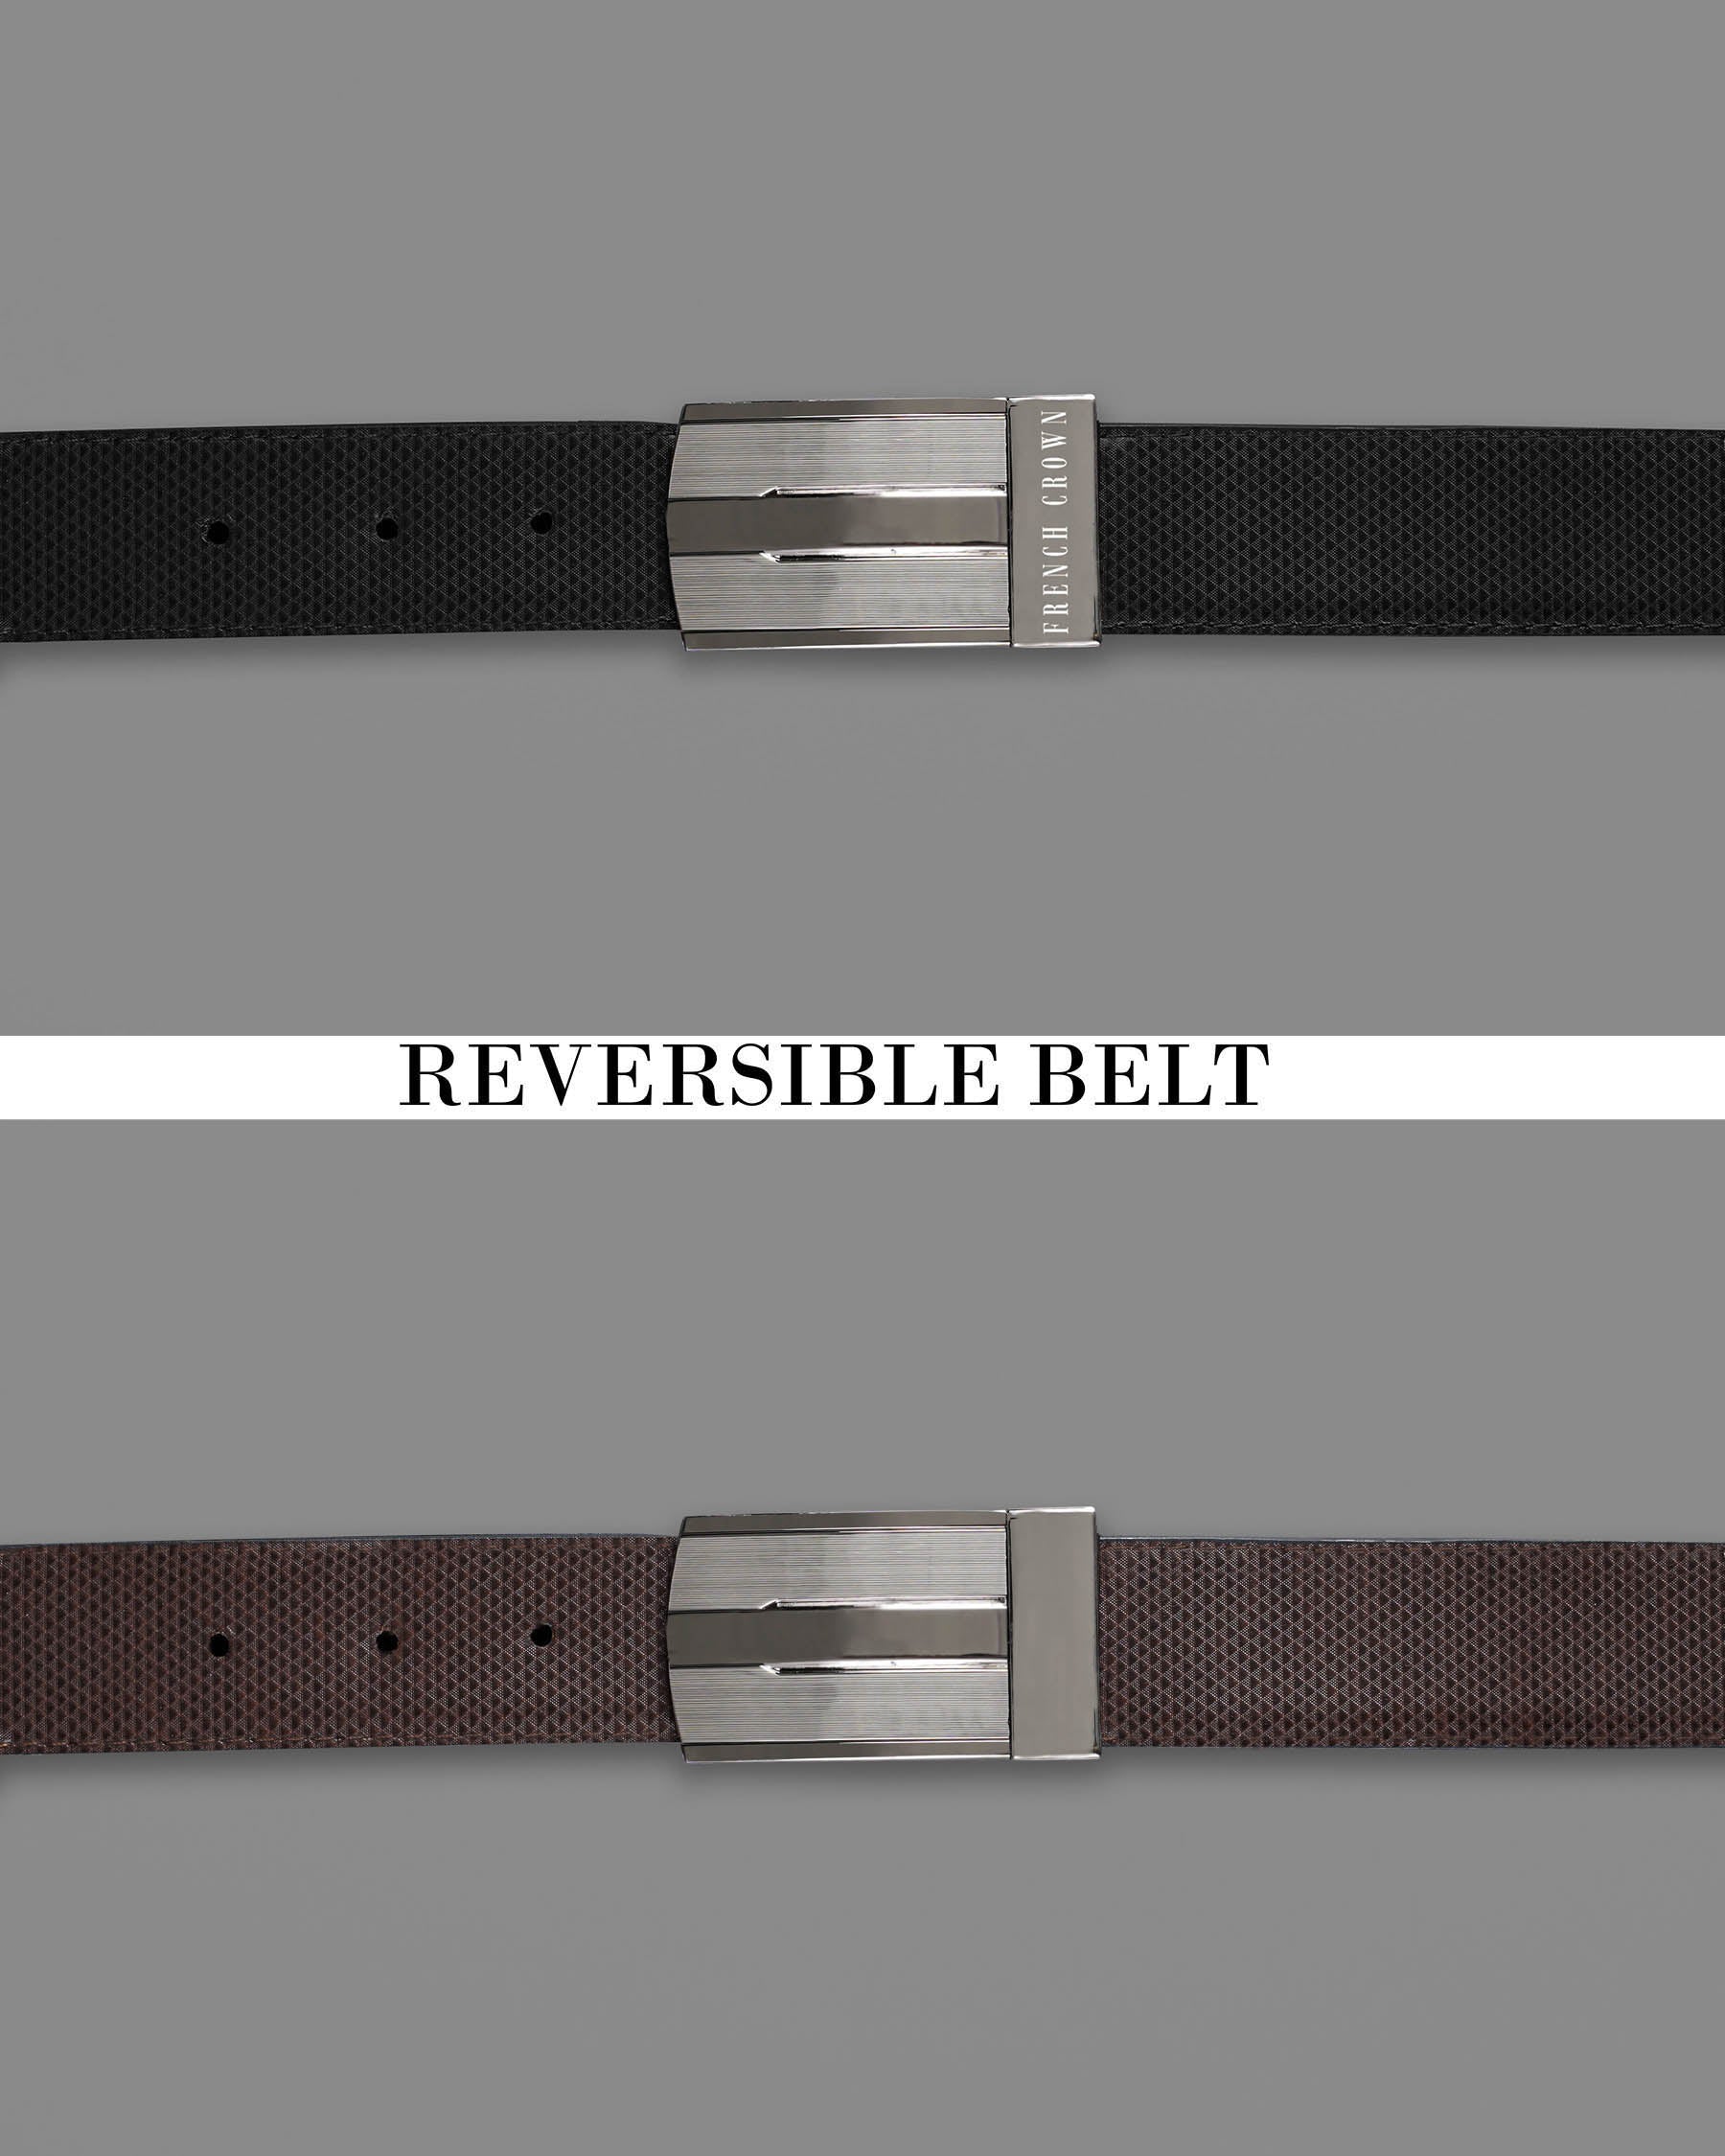 Silver Box Buckle with Jade Black and Brown Leather Free Handcrafted Reversible Belt BT060-28, BT060-30, BT060-32, BT060-34, BT060-36, BT060-38